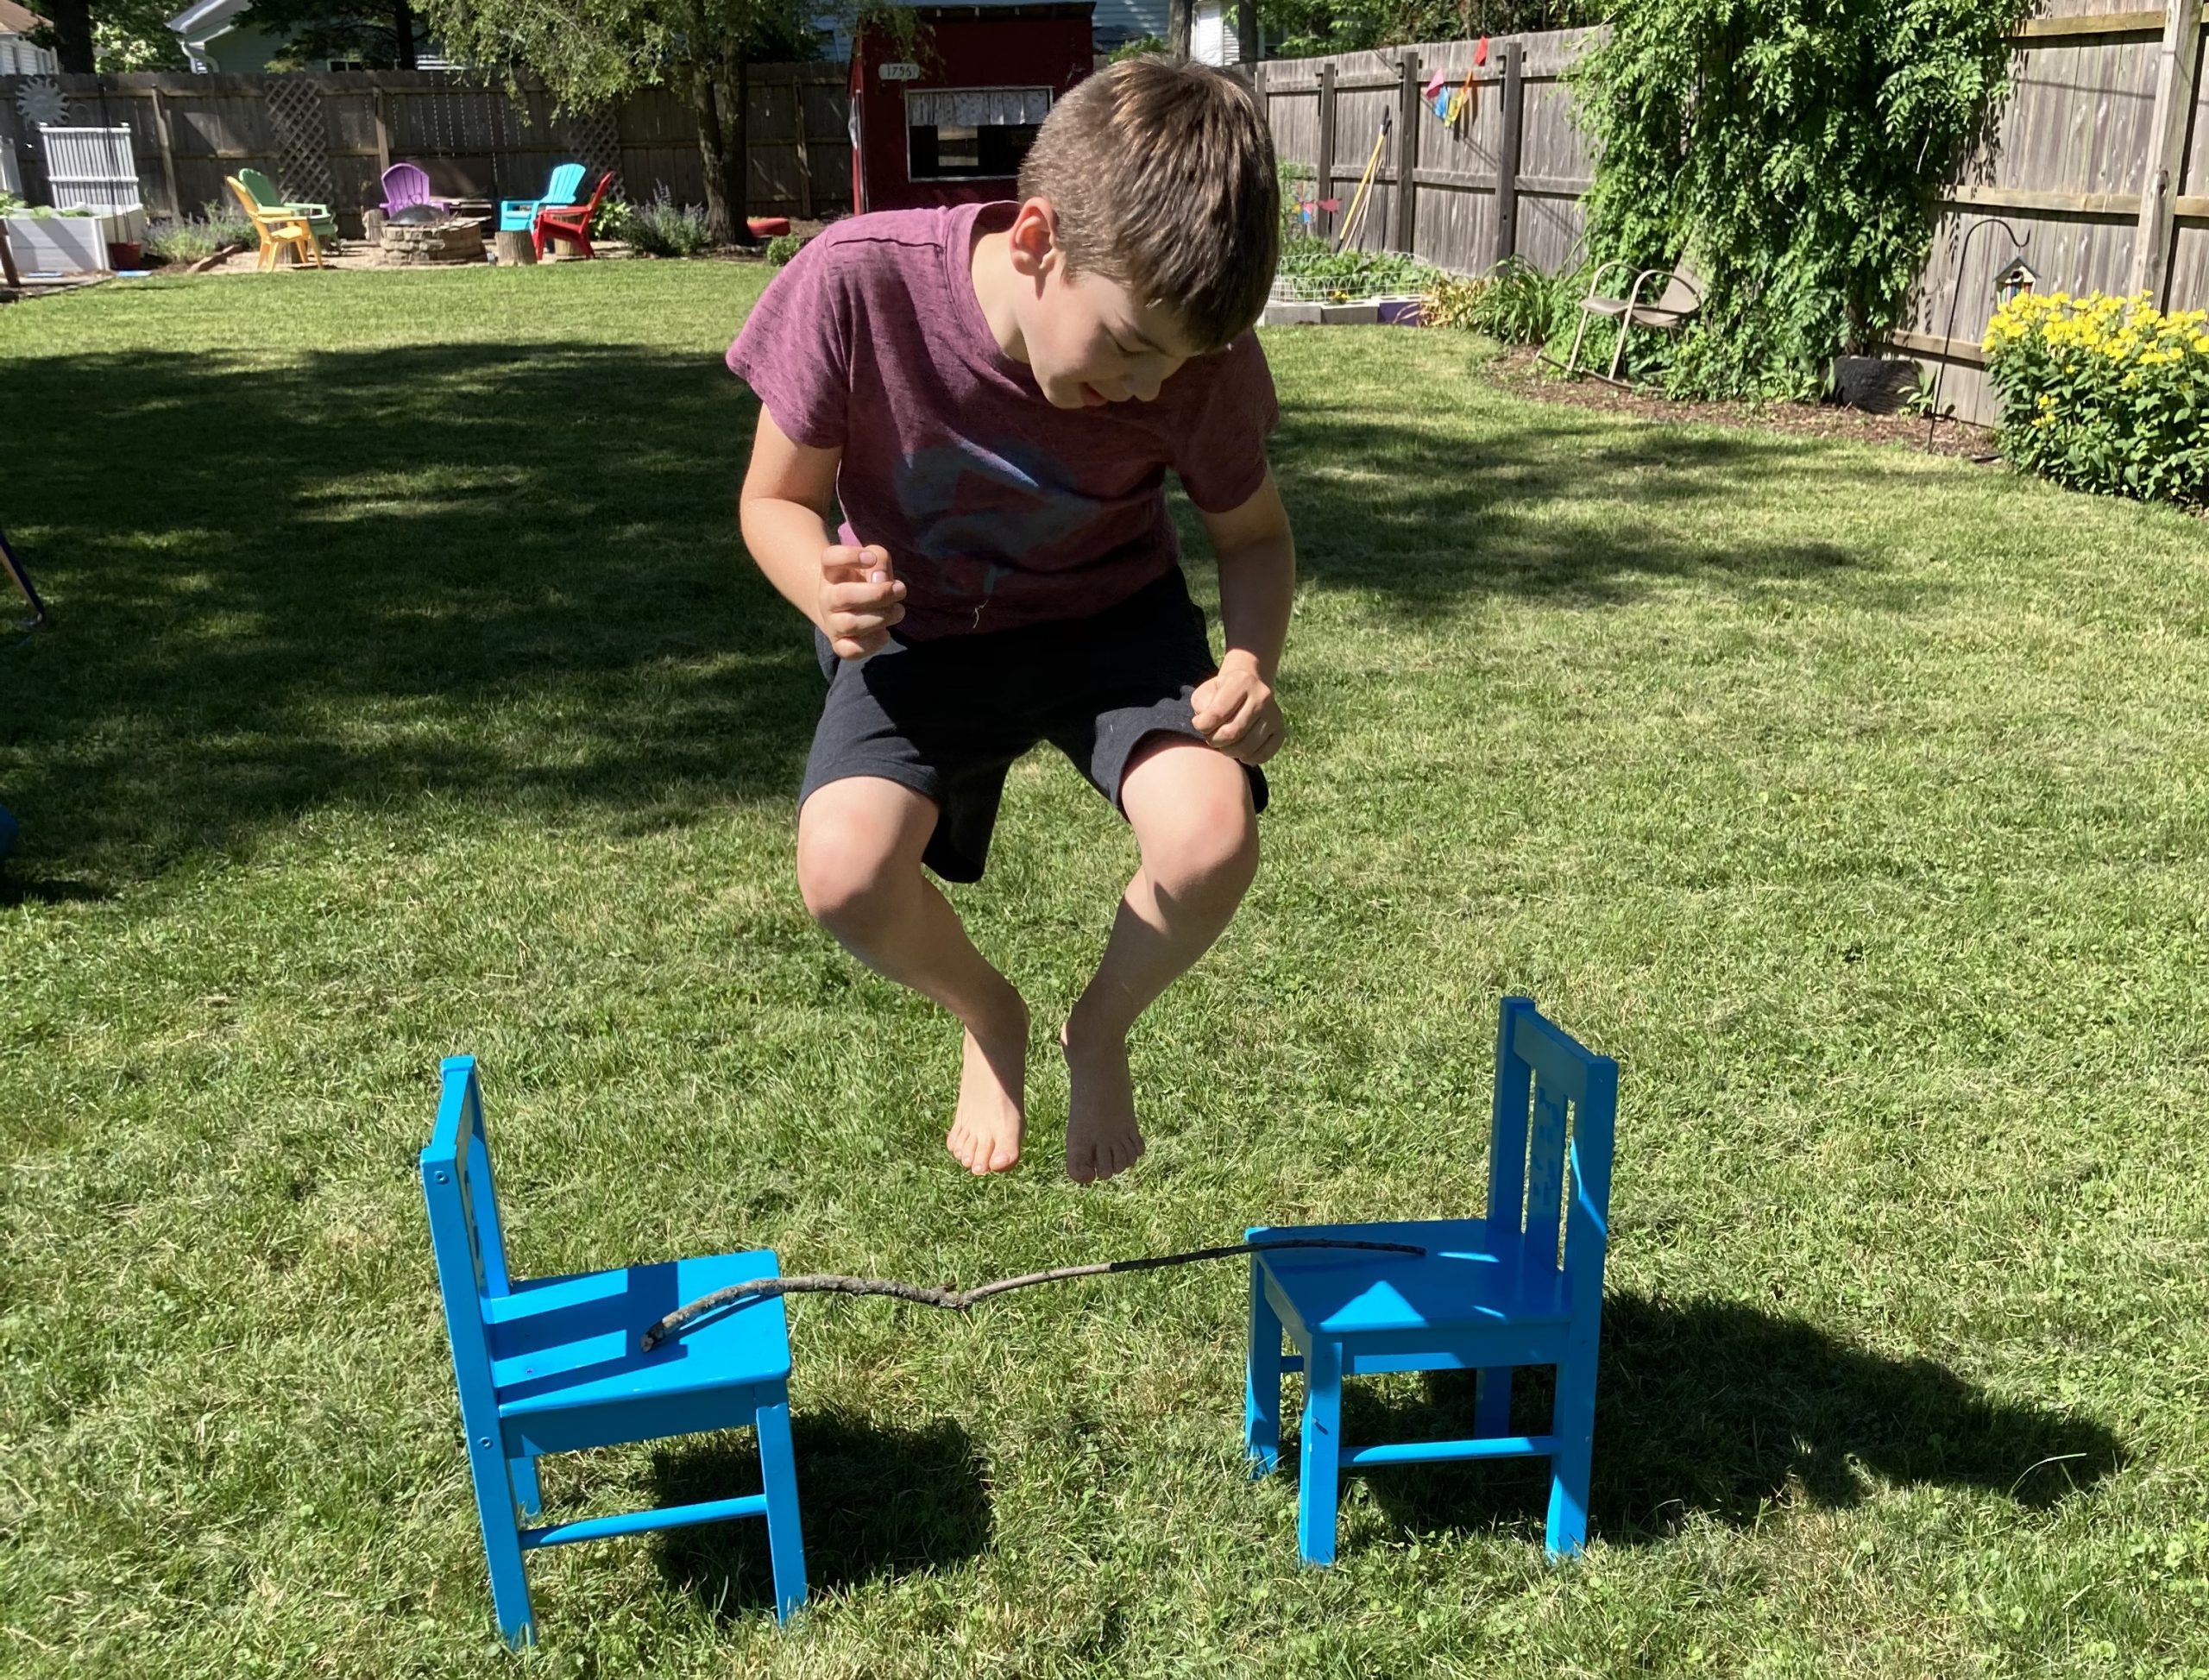 outside activities for kids obstacle course math